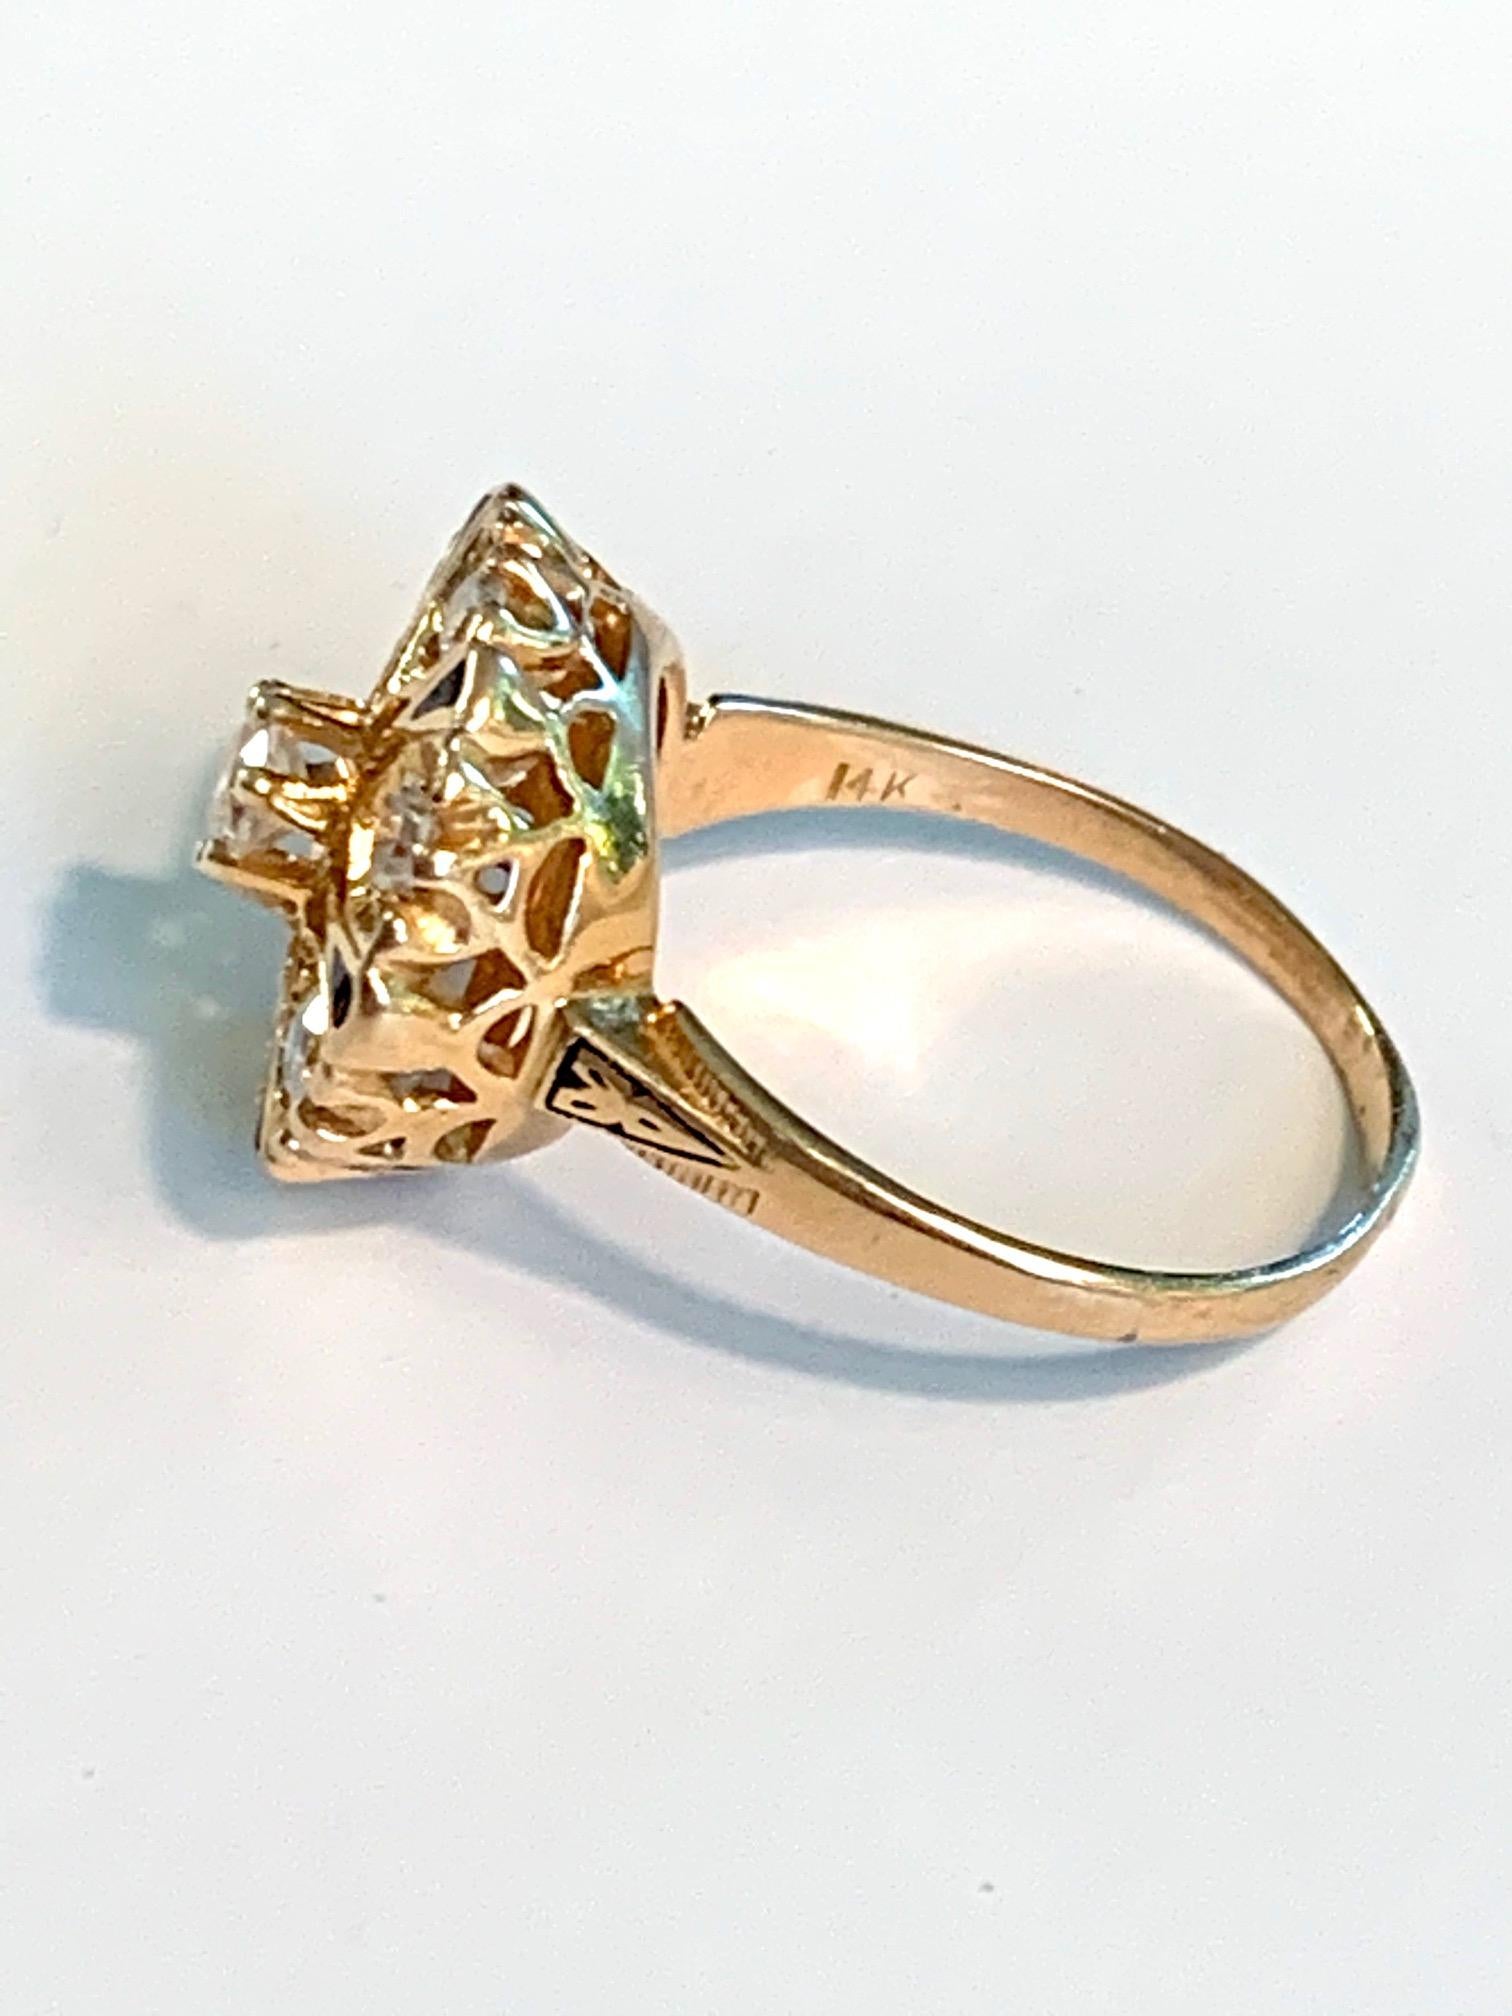 Antique European and Old Cut Diamond and Enamel Ring 3